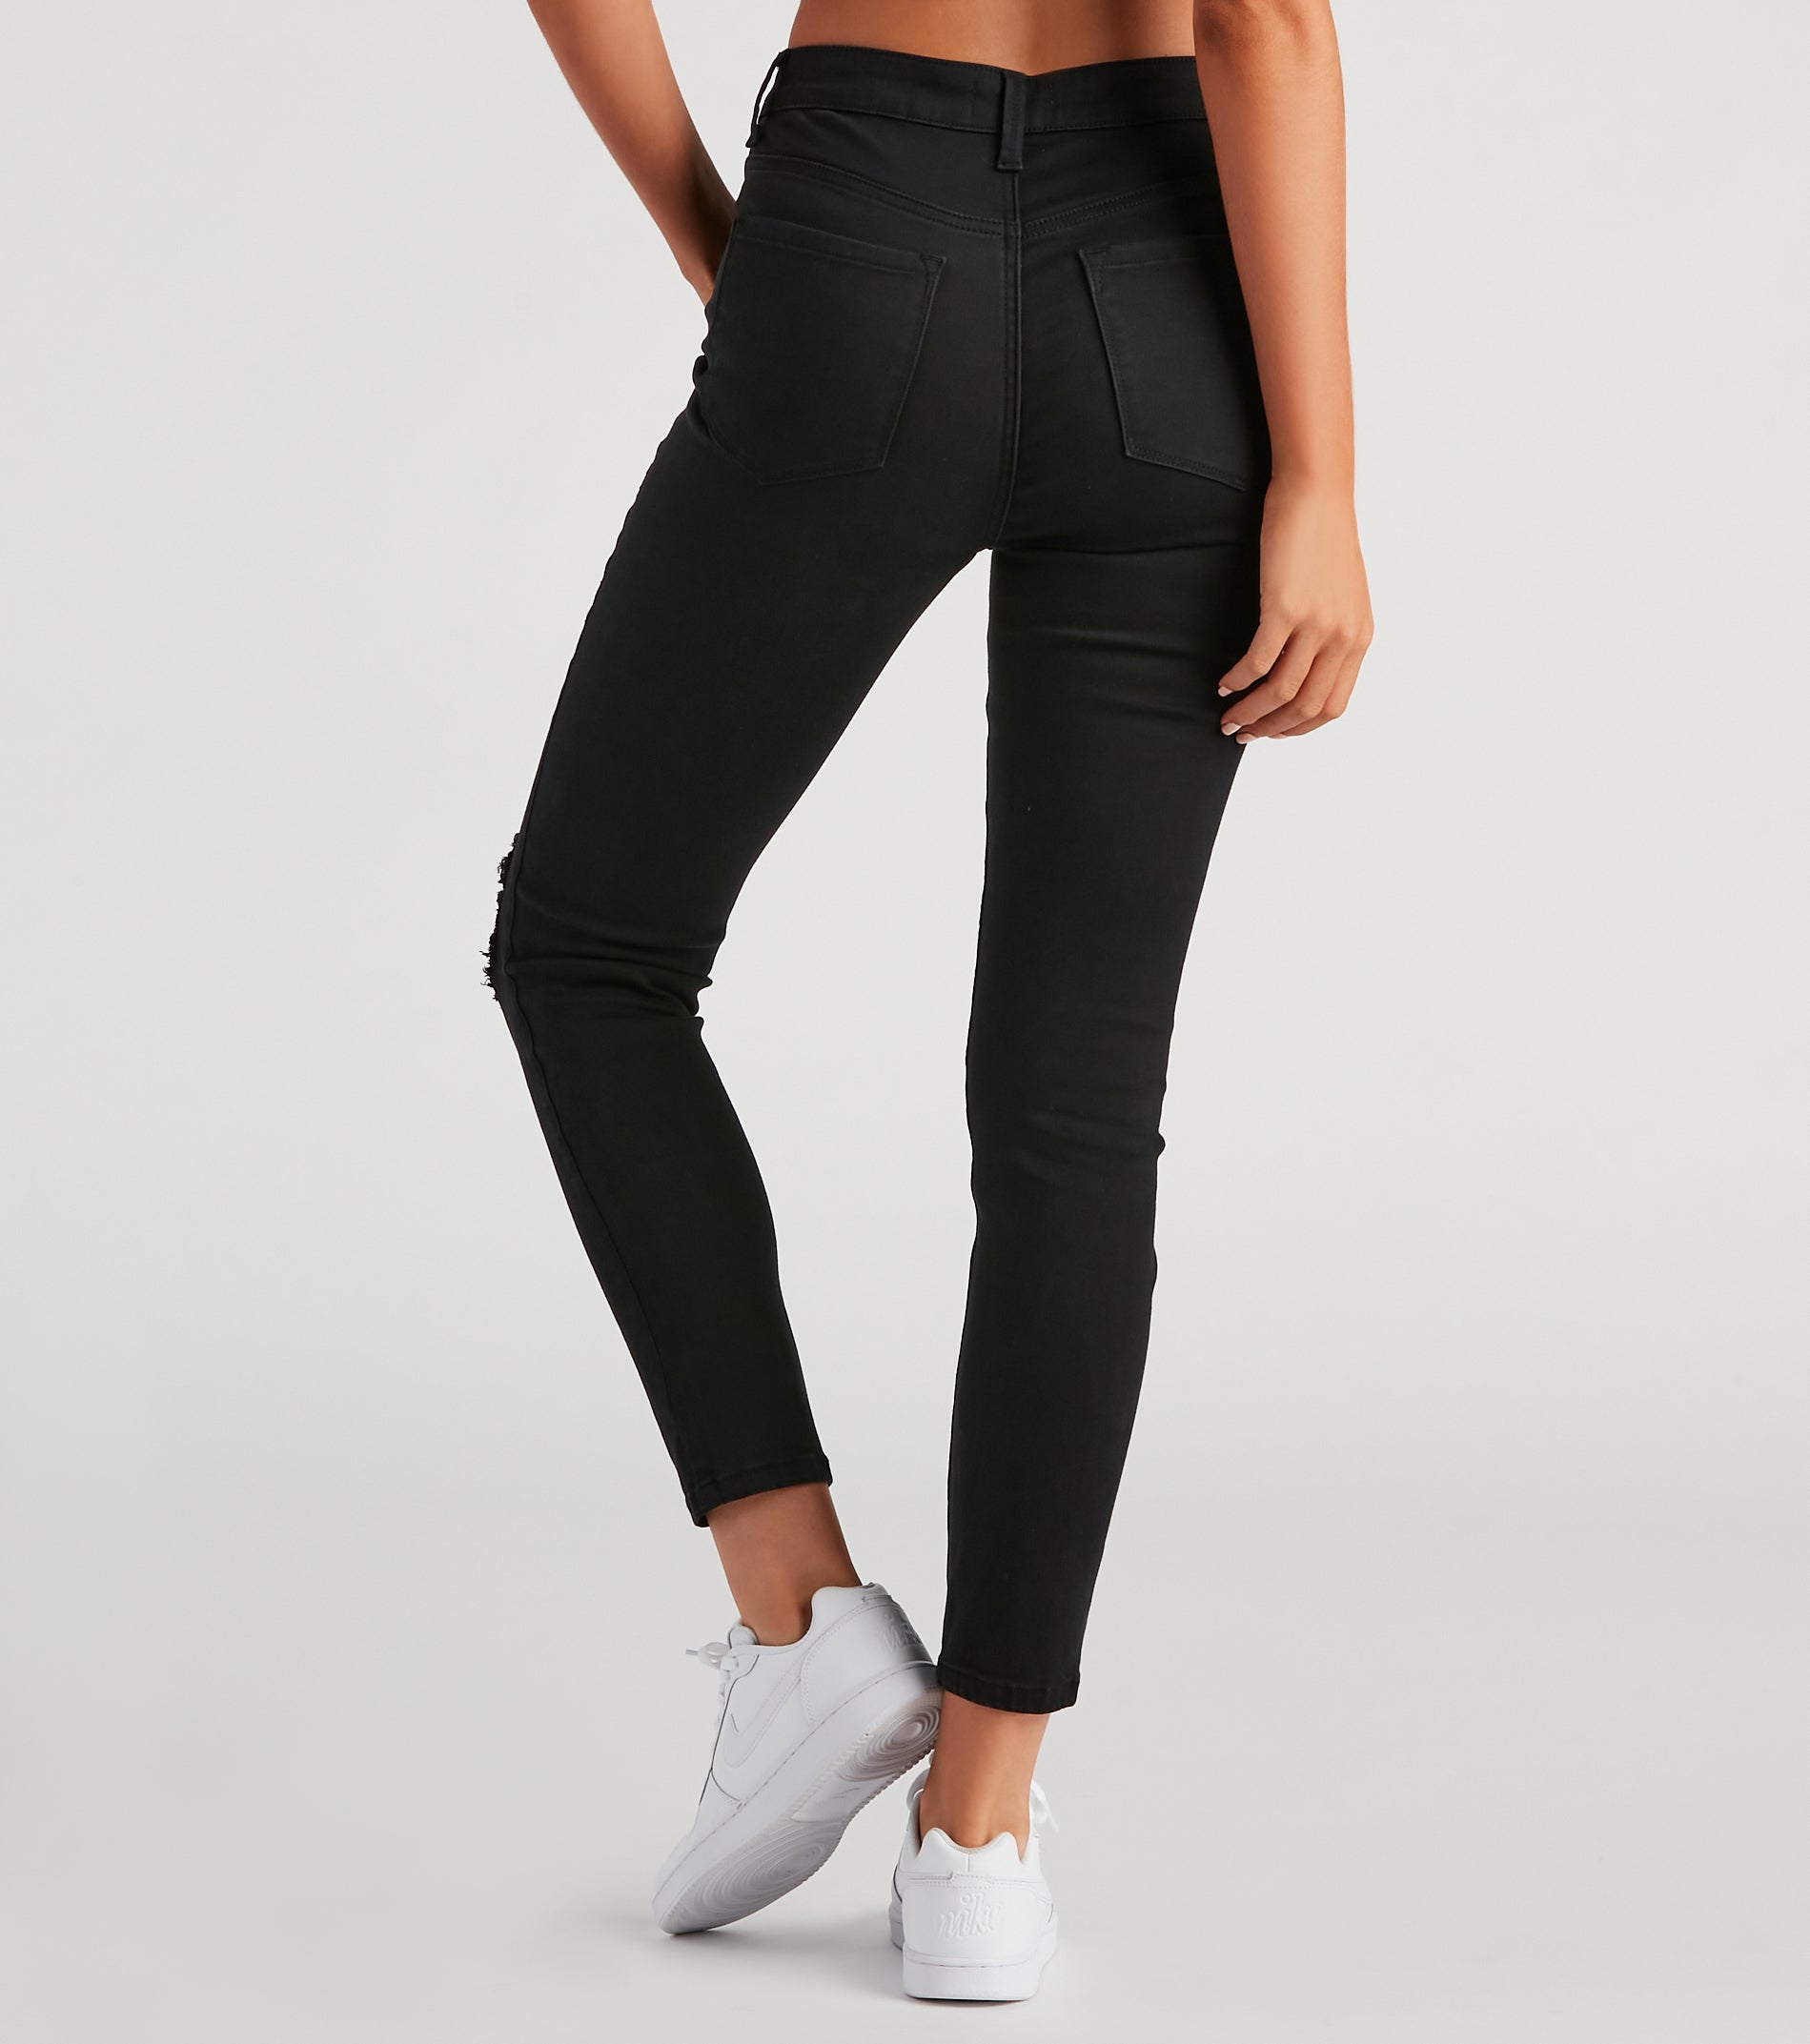 Taylor High-Rise Distressed Skinny Ankle Jeans by Windsor Denim